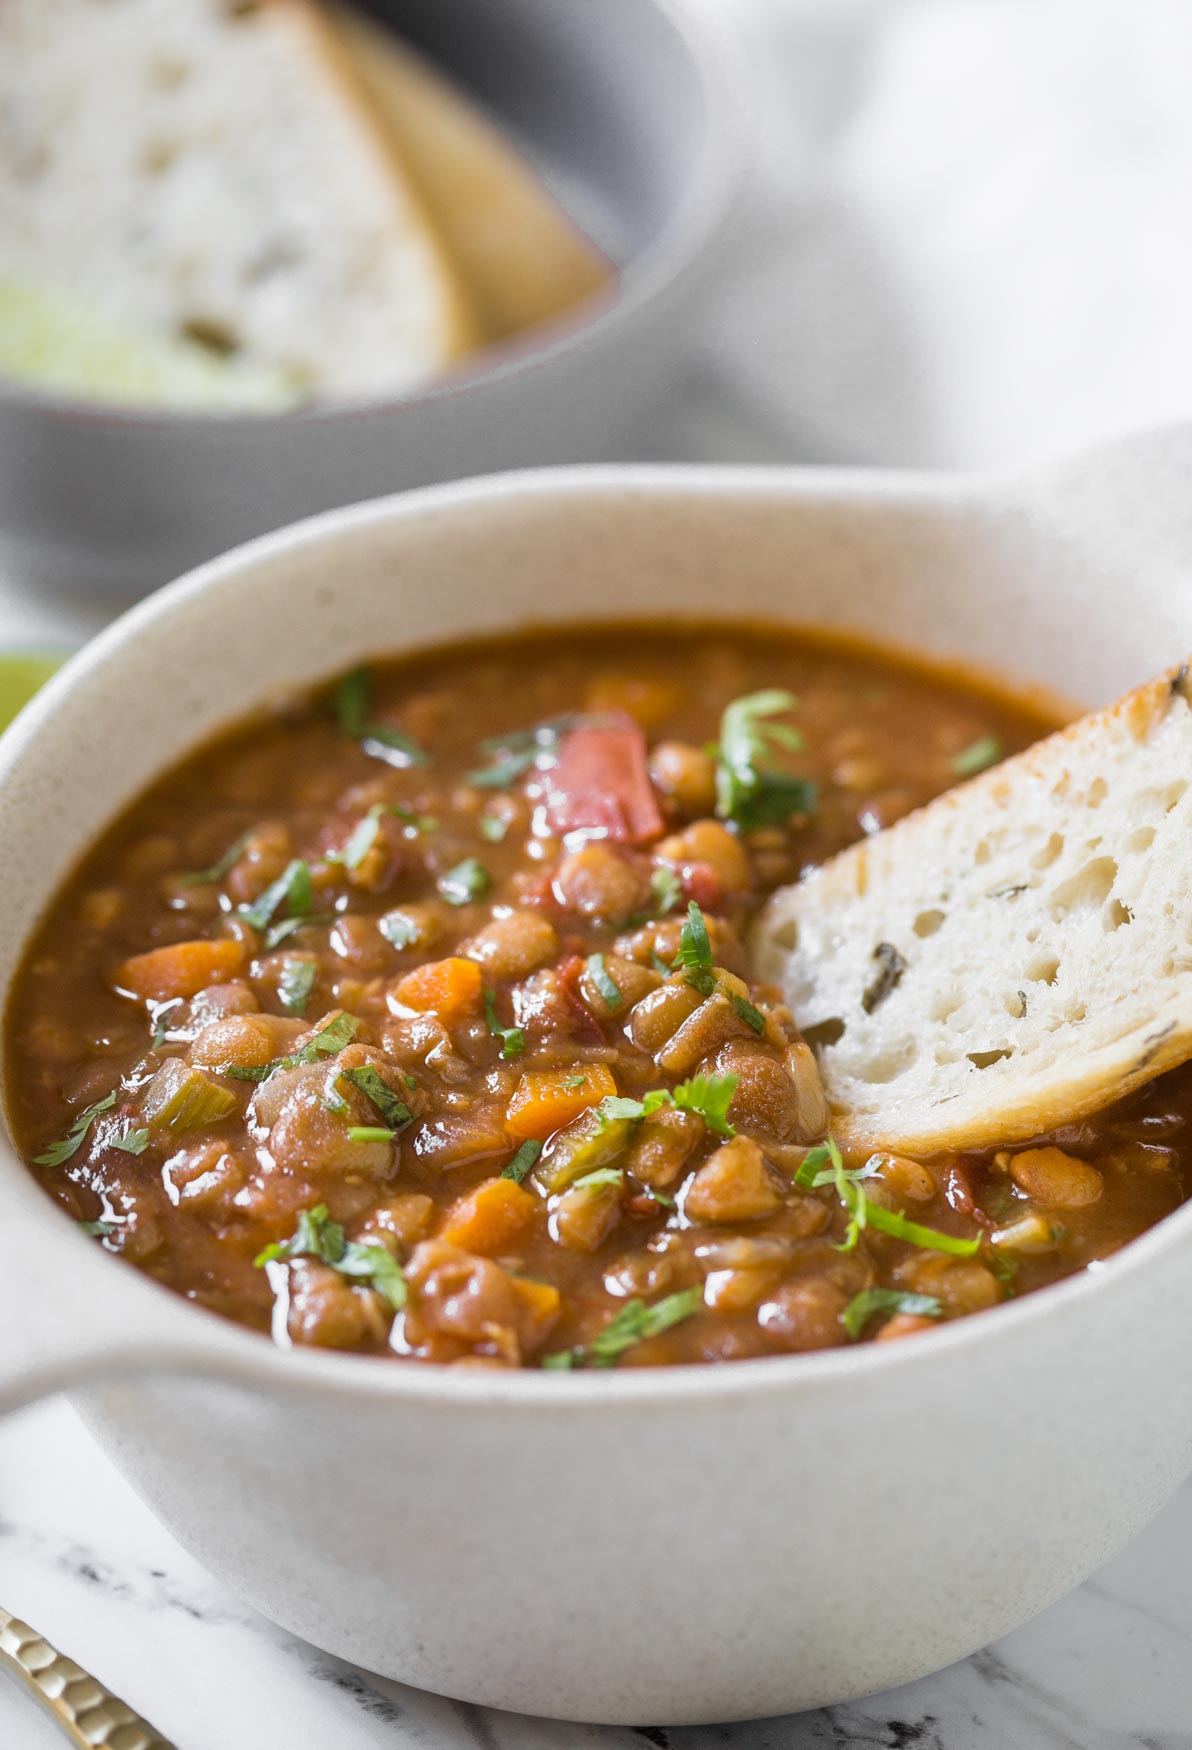 Whole lentil soup in bowl with bread